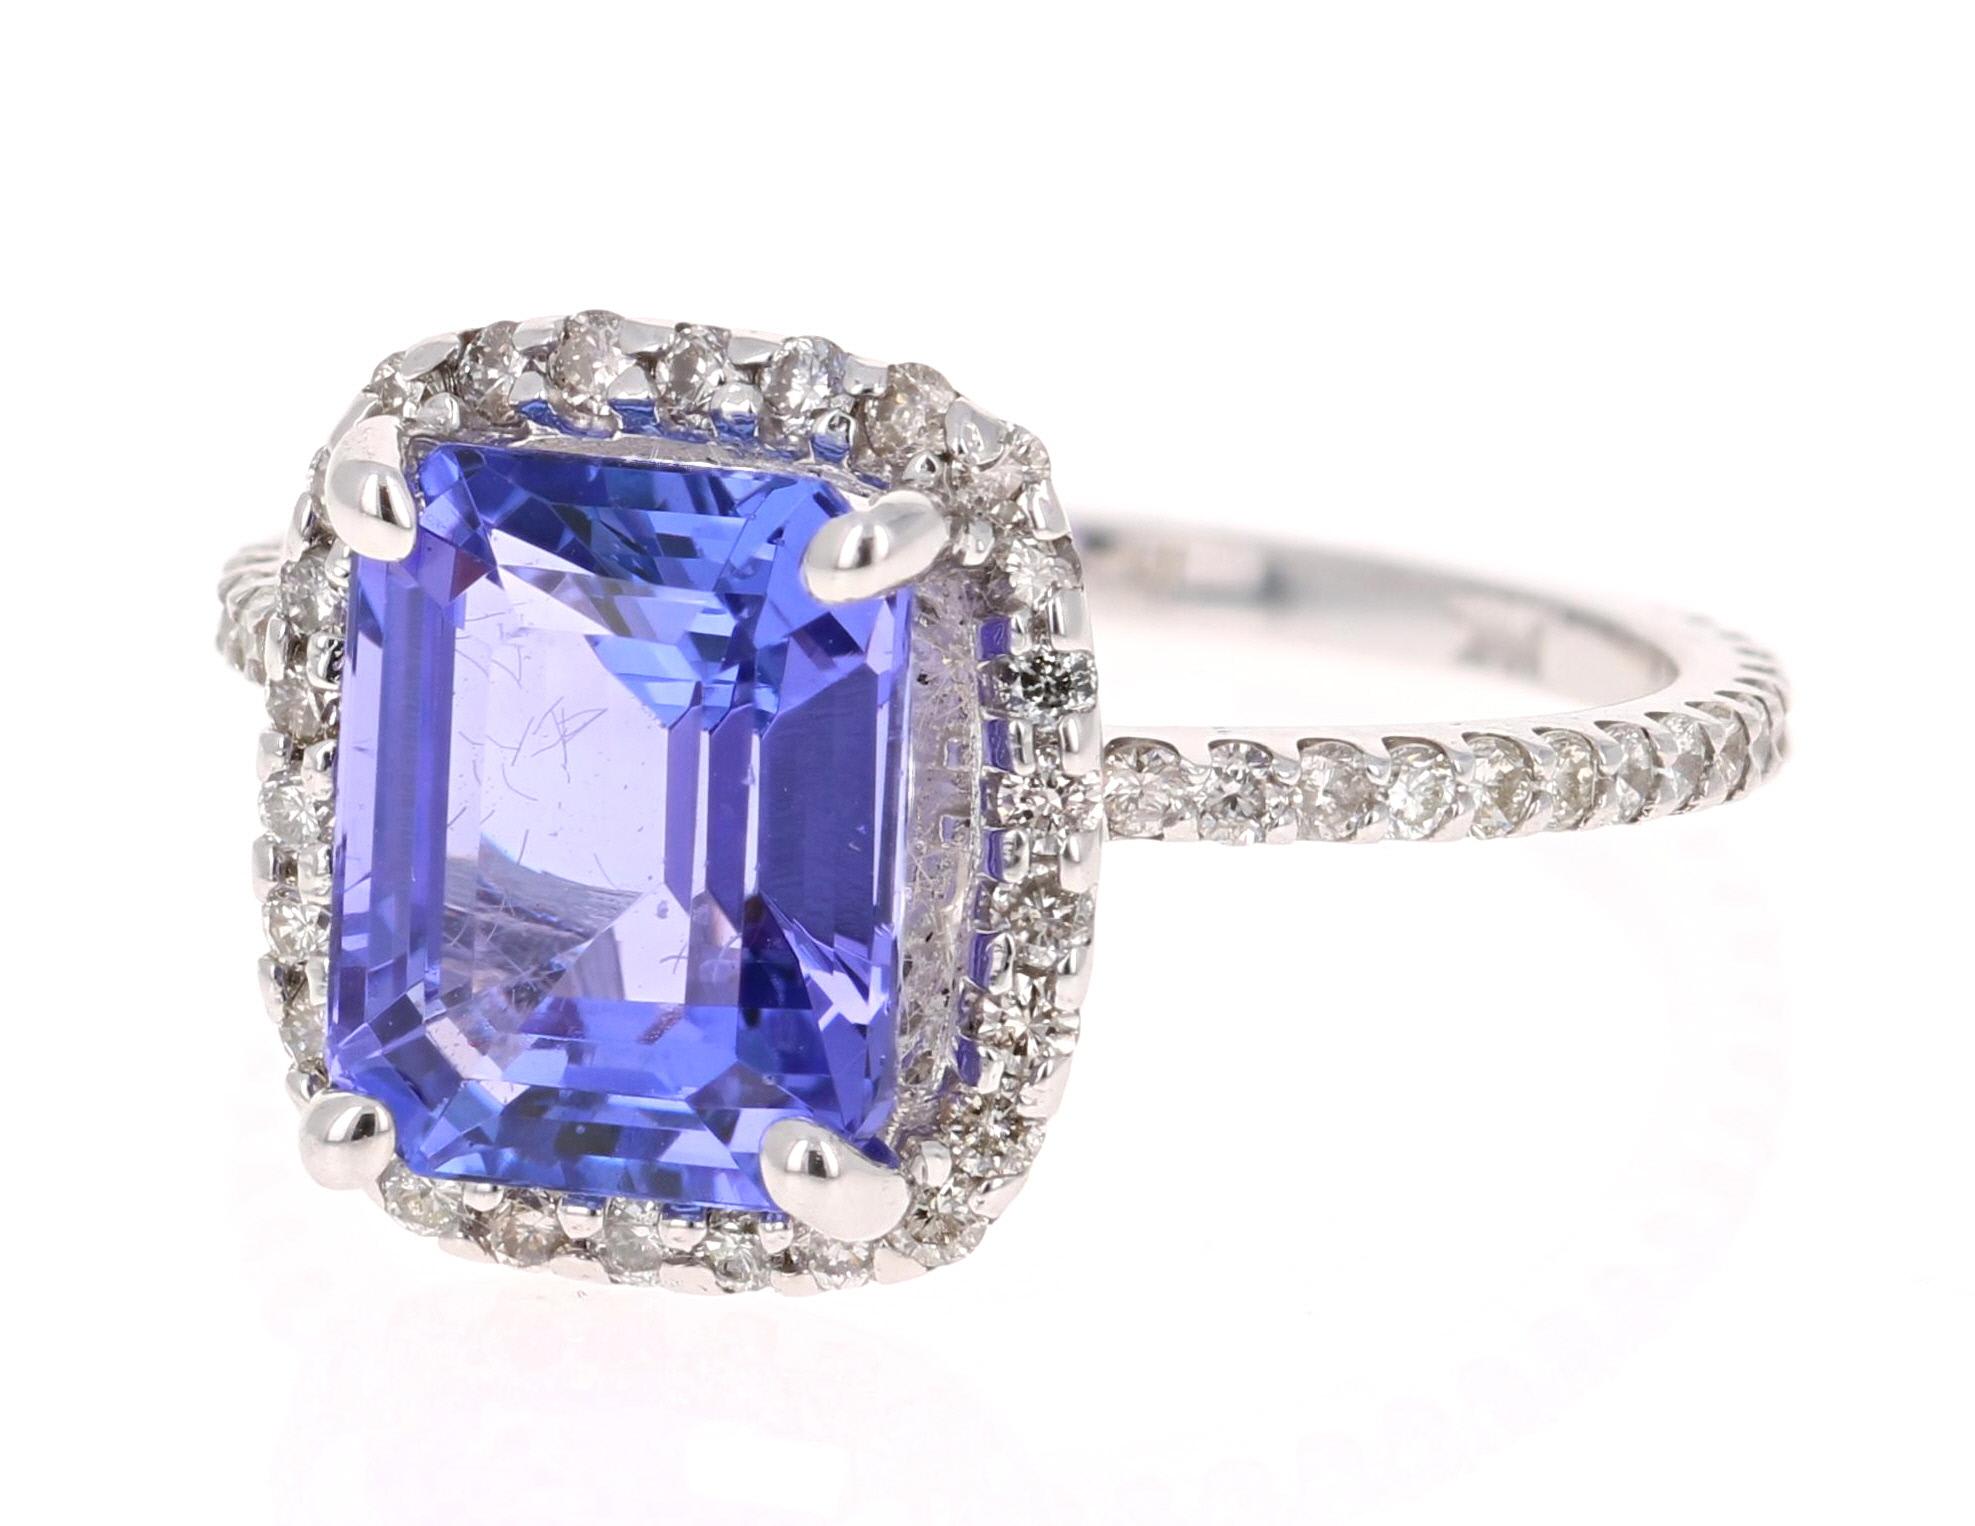 A gorgeous 4.30 Carat Tanzanite and Diamond Ring that can easily transform into a unique Engagement Ring for that special someone!

The Tanzanite is an Emerald cut stone and weighs 3.62 carats.  The ring is surrounded by a Halo of 74 Round Brilliant